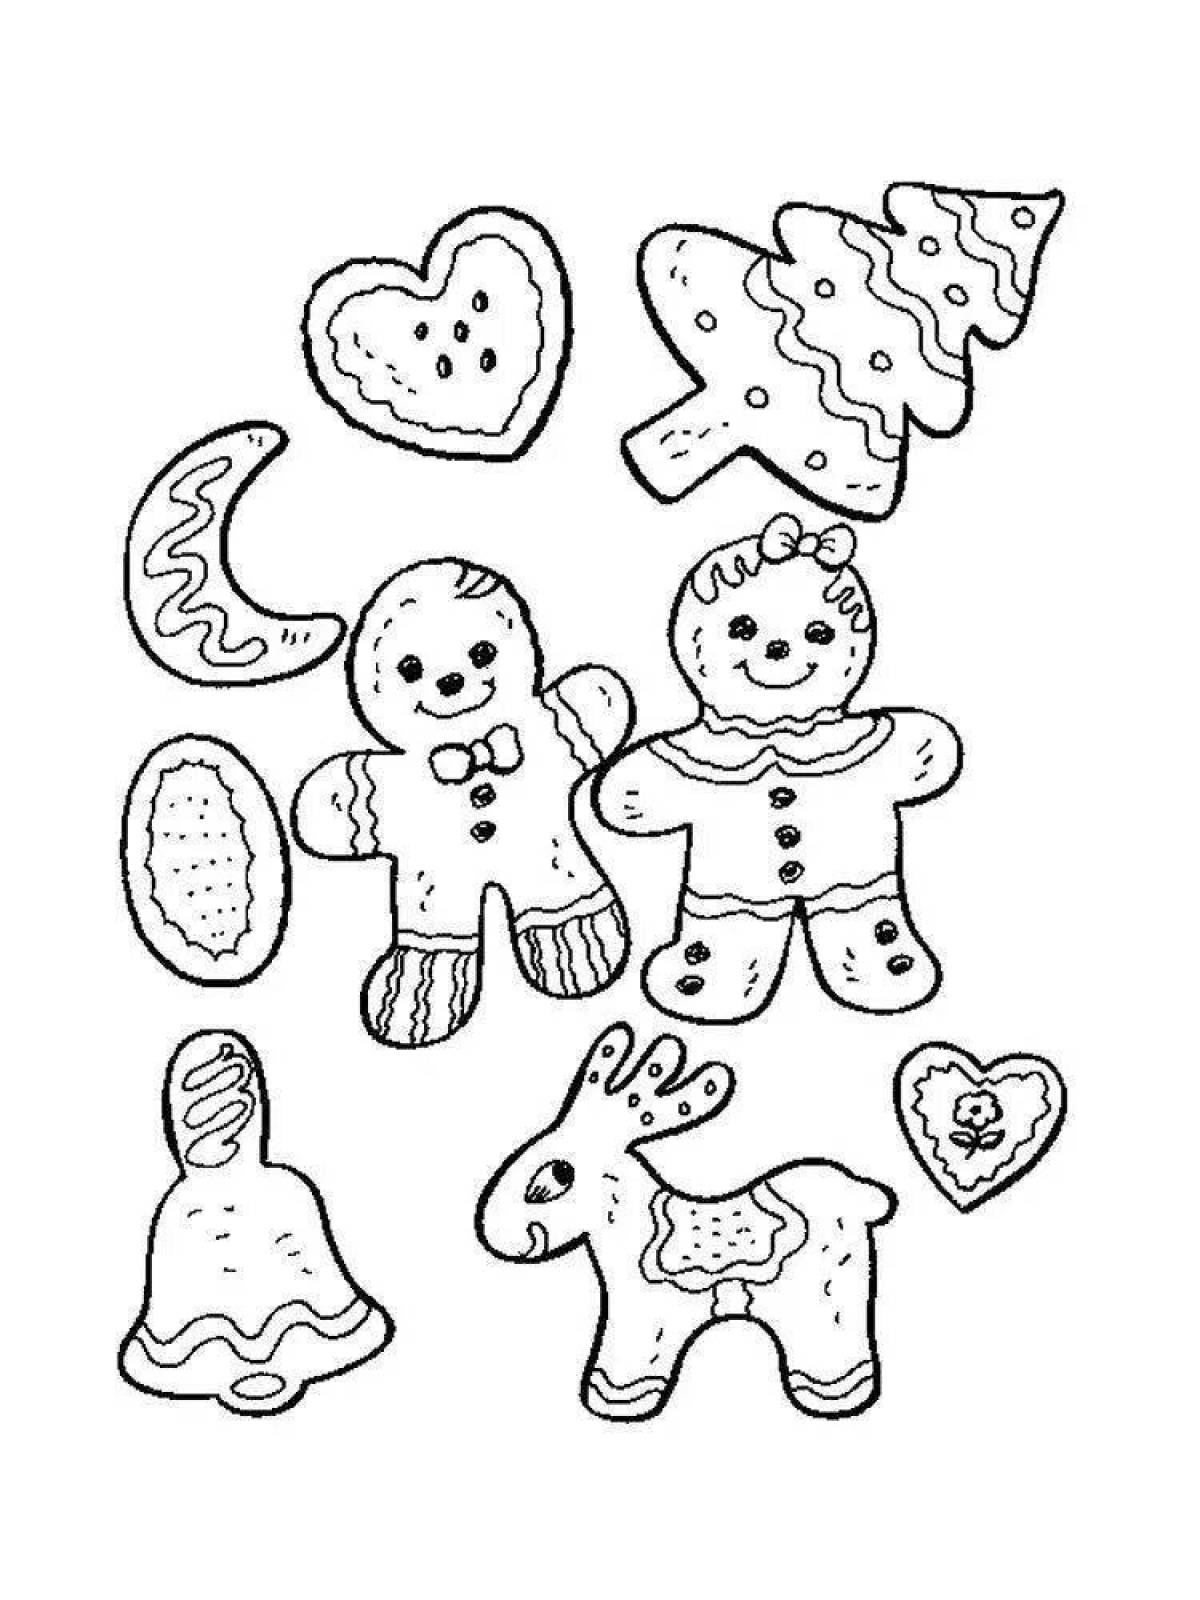 Attractive gingerbread Christmas coloring book